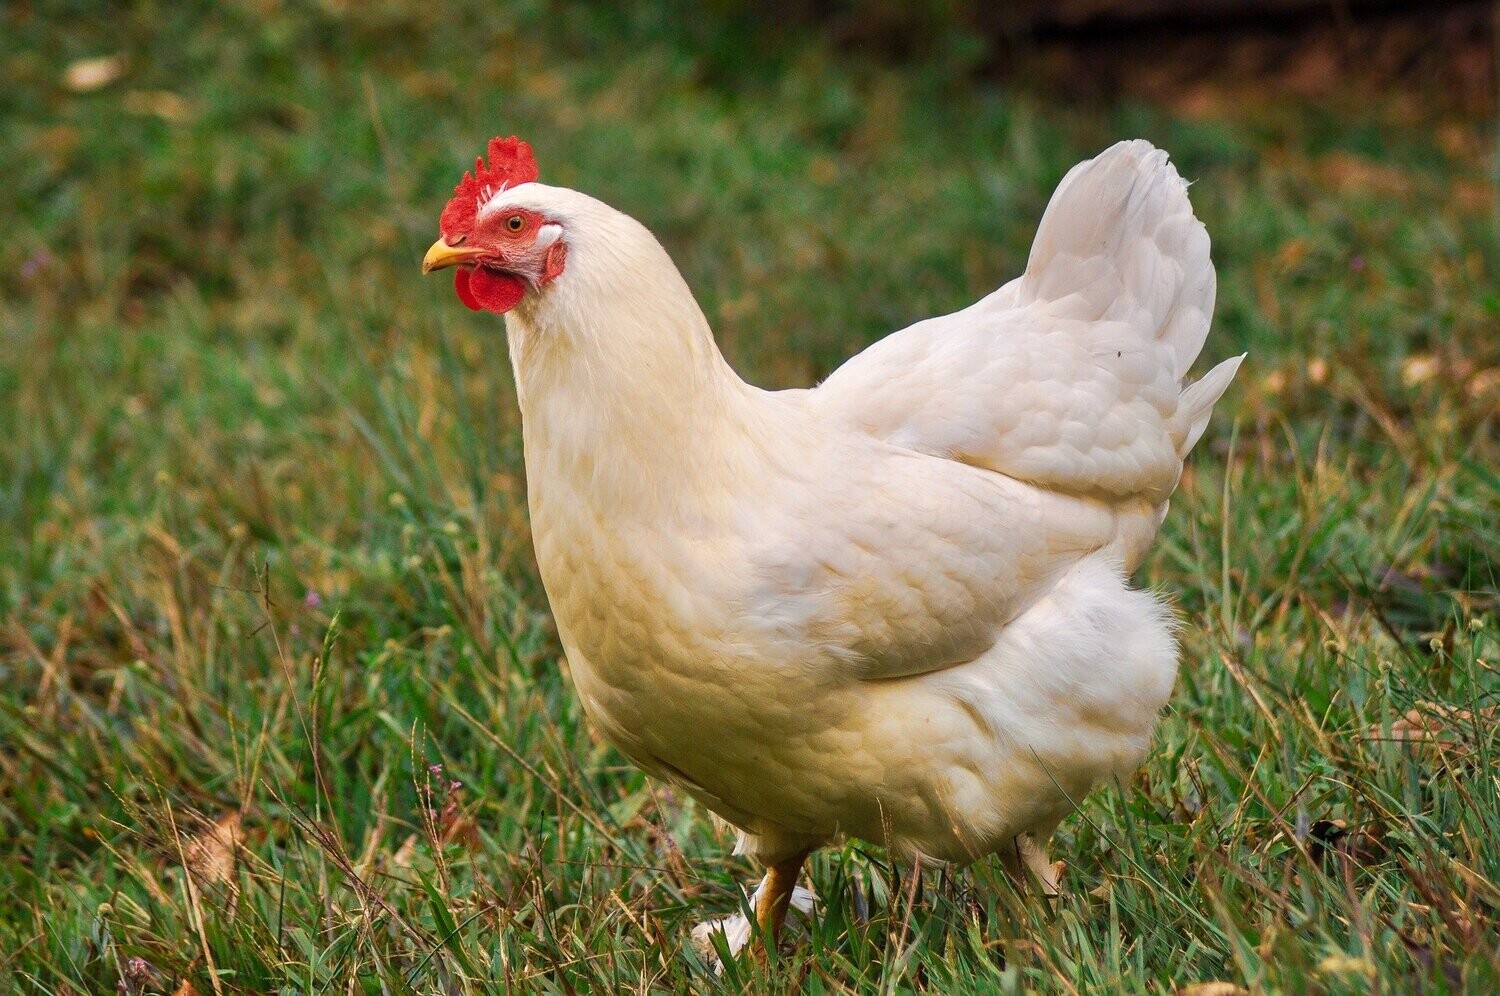 EFSA: alternatives to cages recommended to improve broiler and hen